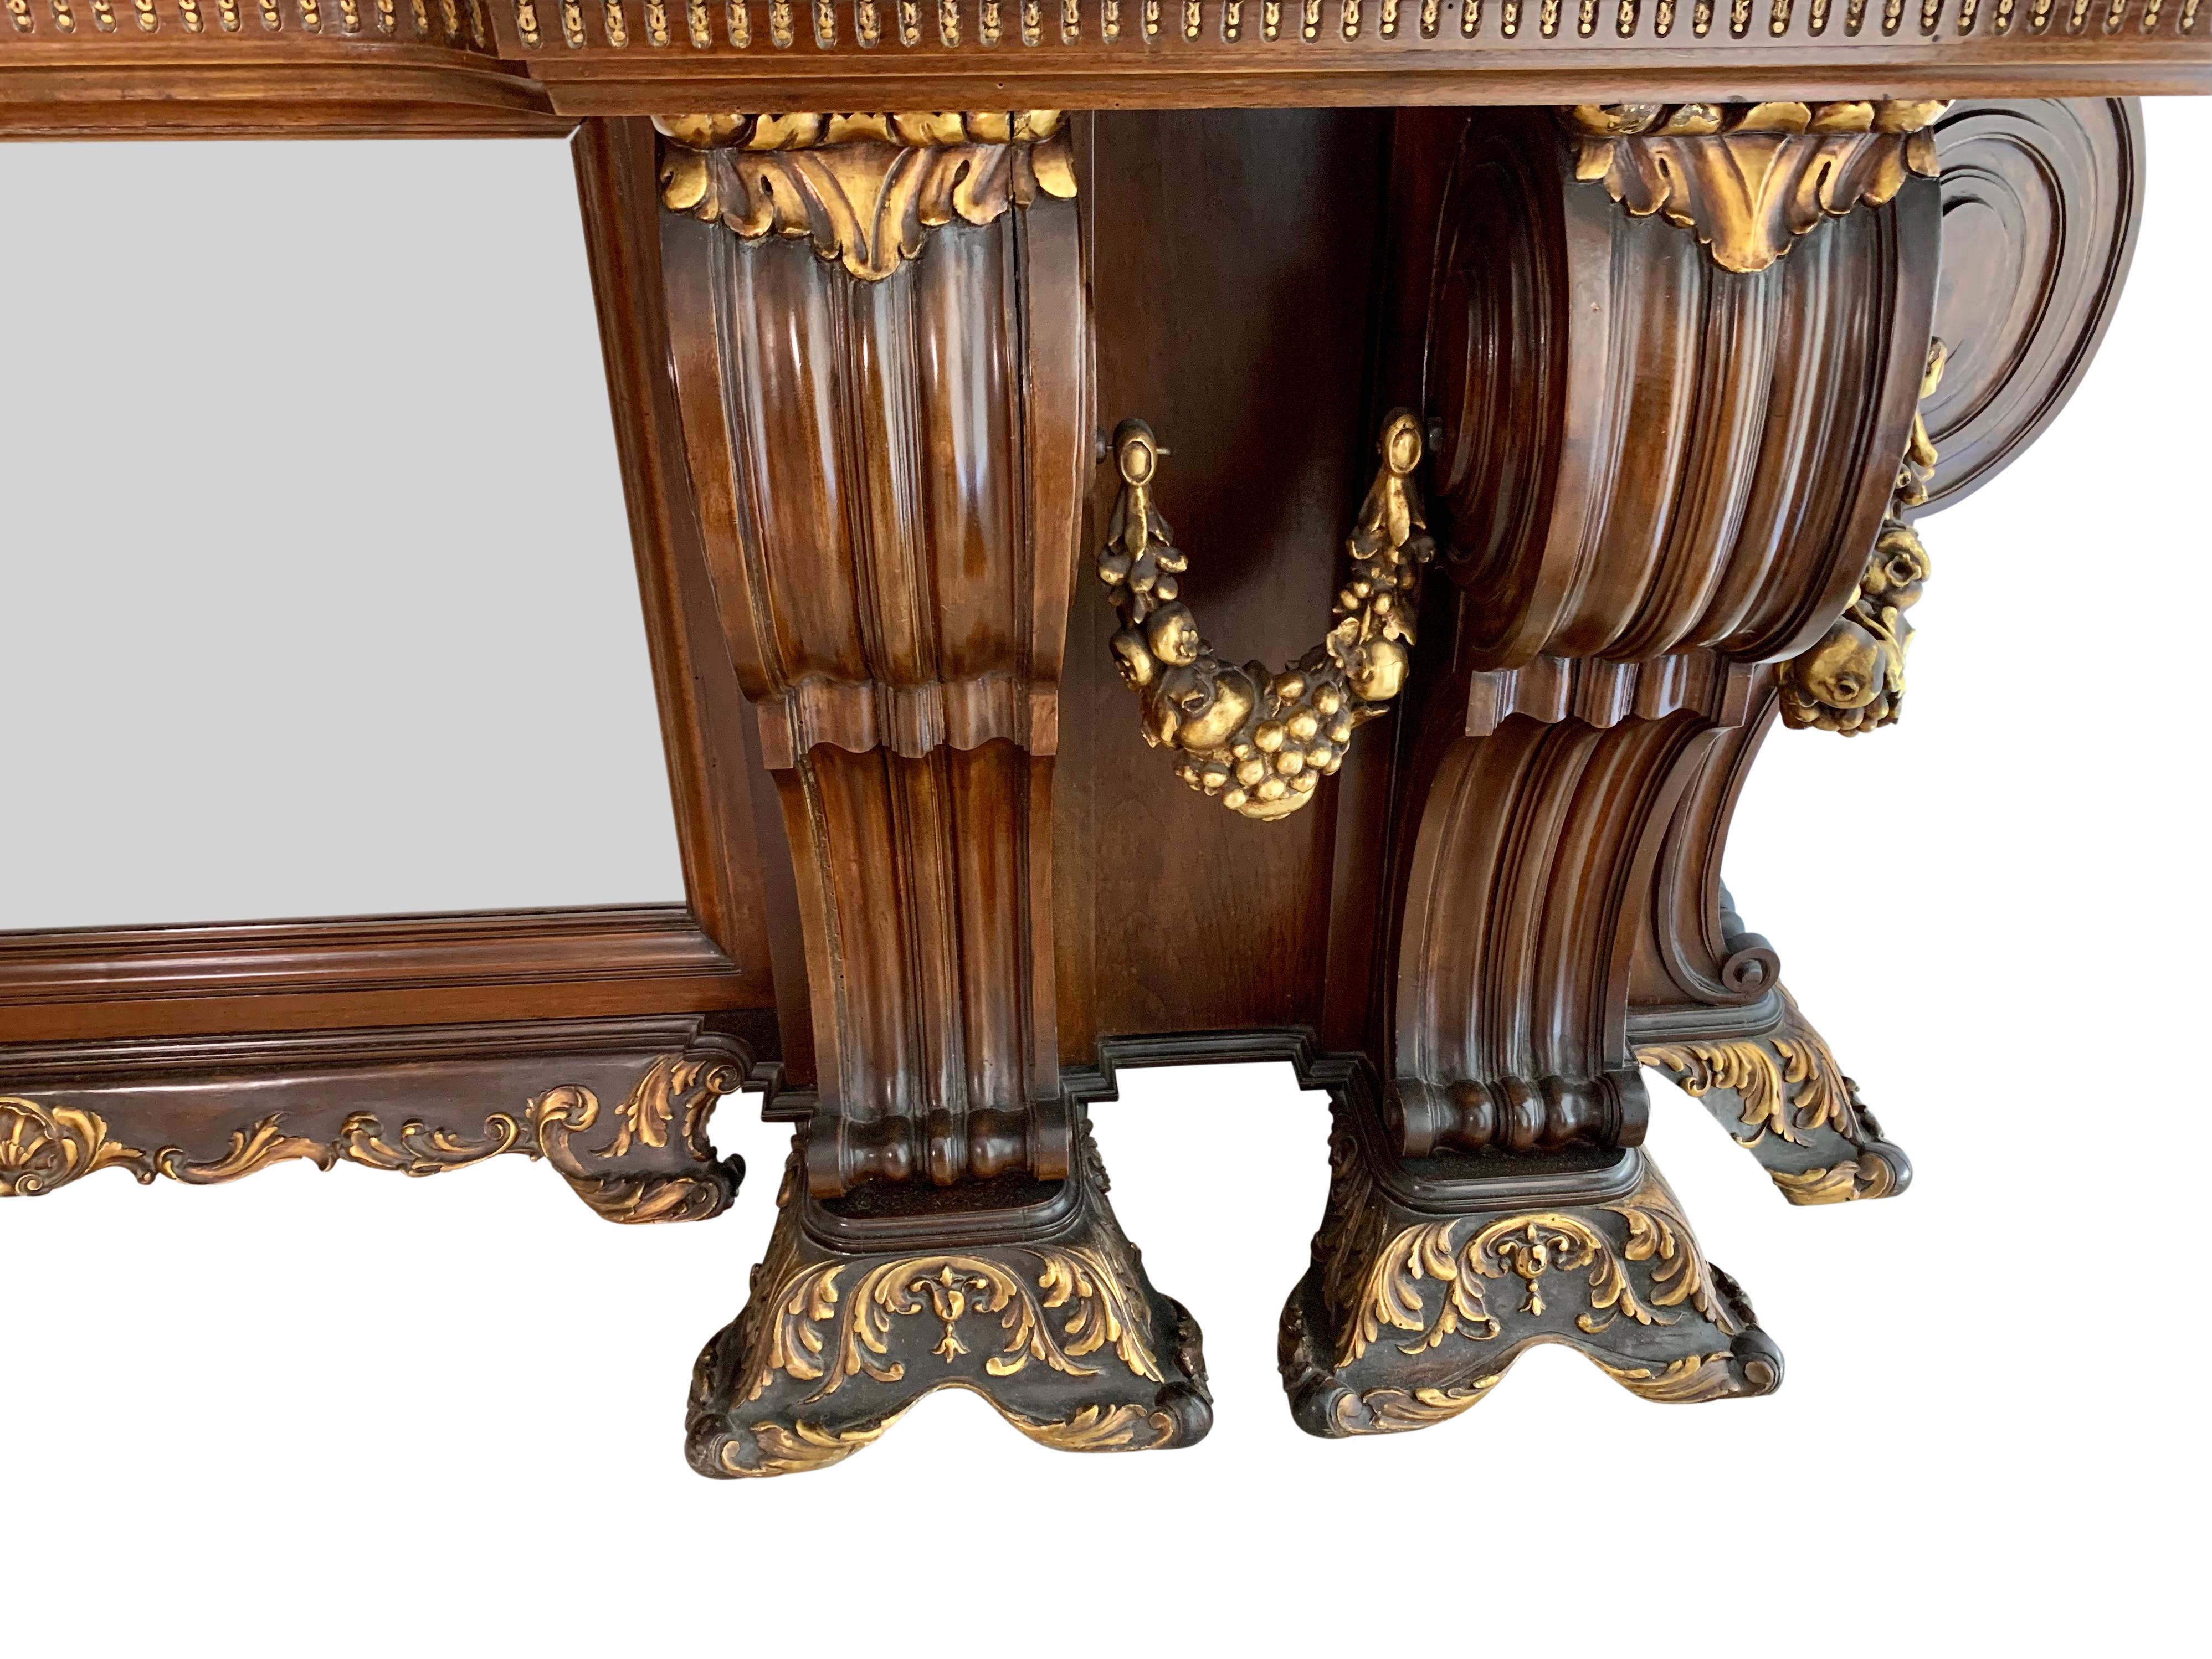 An impressive and large-scale Italian Neoclassical style brown and parcel gilt hand carved wood console table. The white marble top with delicate veins above six massive curved legs flanked by four carved giltwood wreaths and centered by a